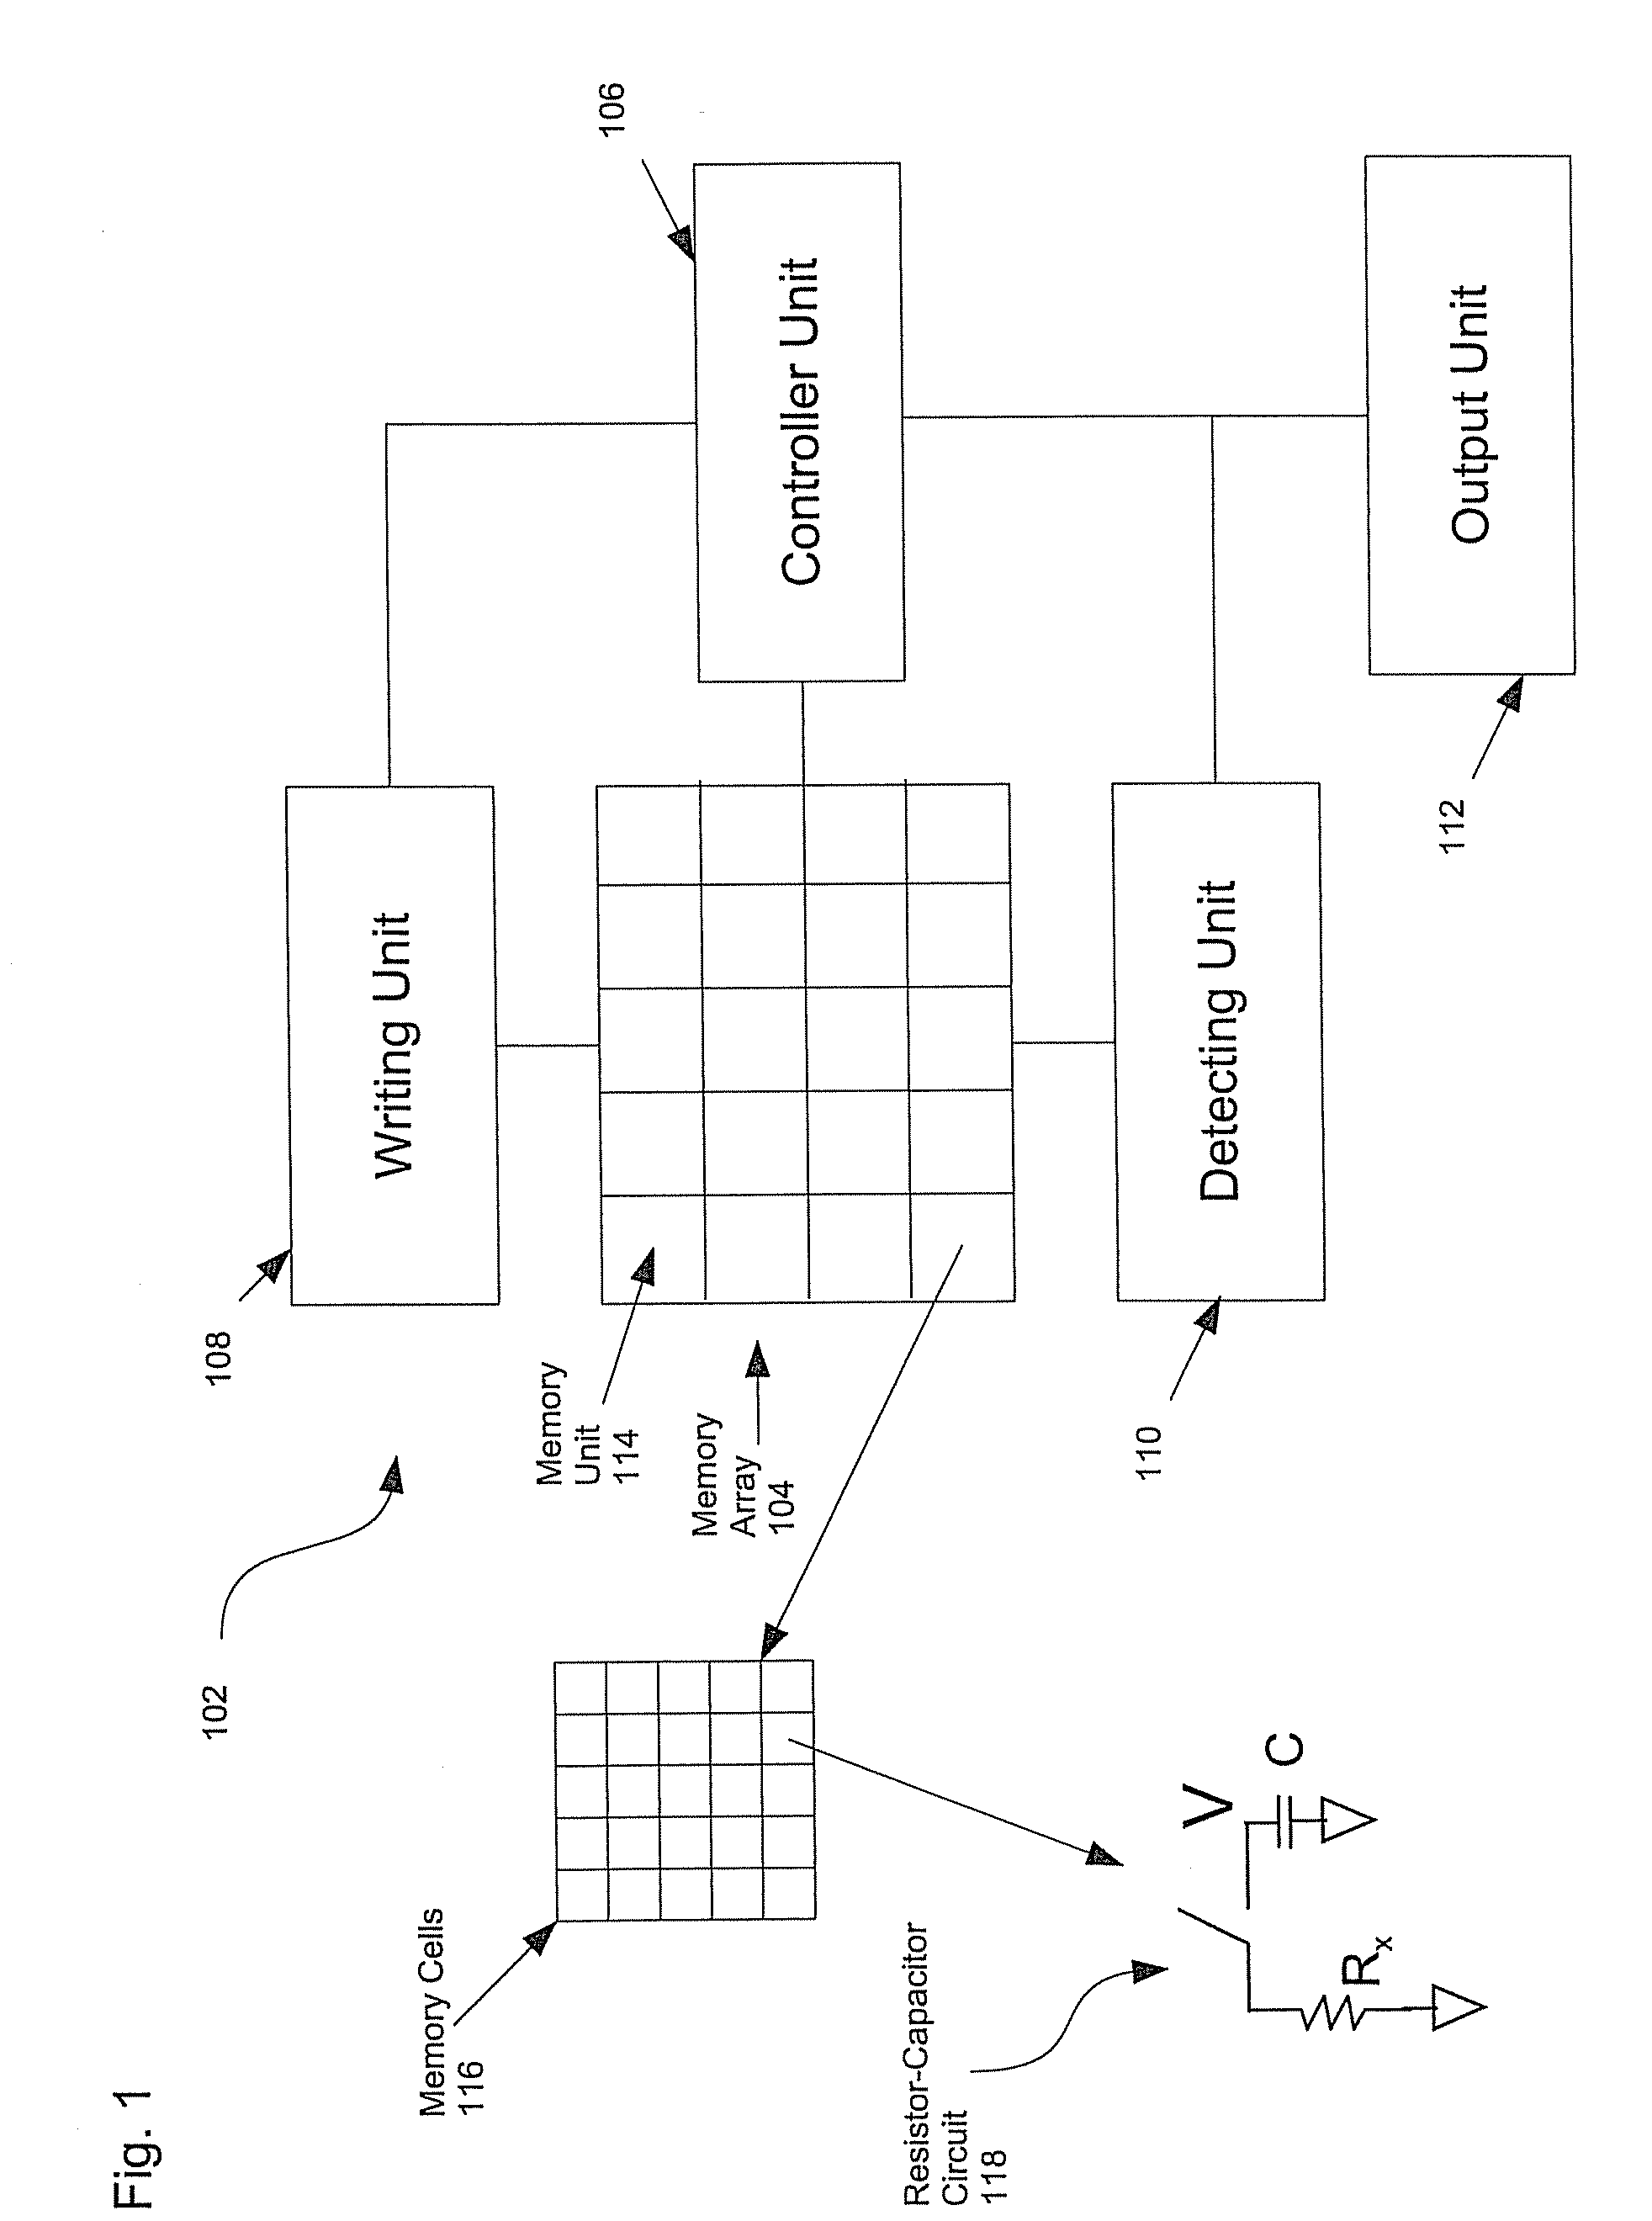 Measurement method for reading multi-level memory cell utilizing measurement time delay as the characteristic parameter for level definition